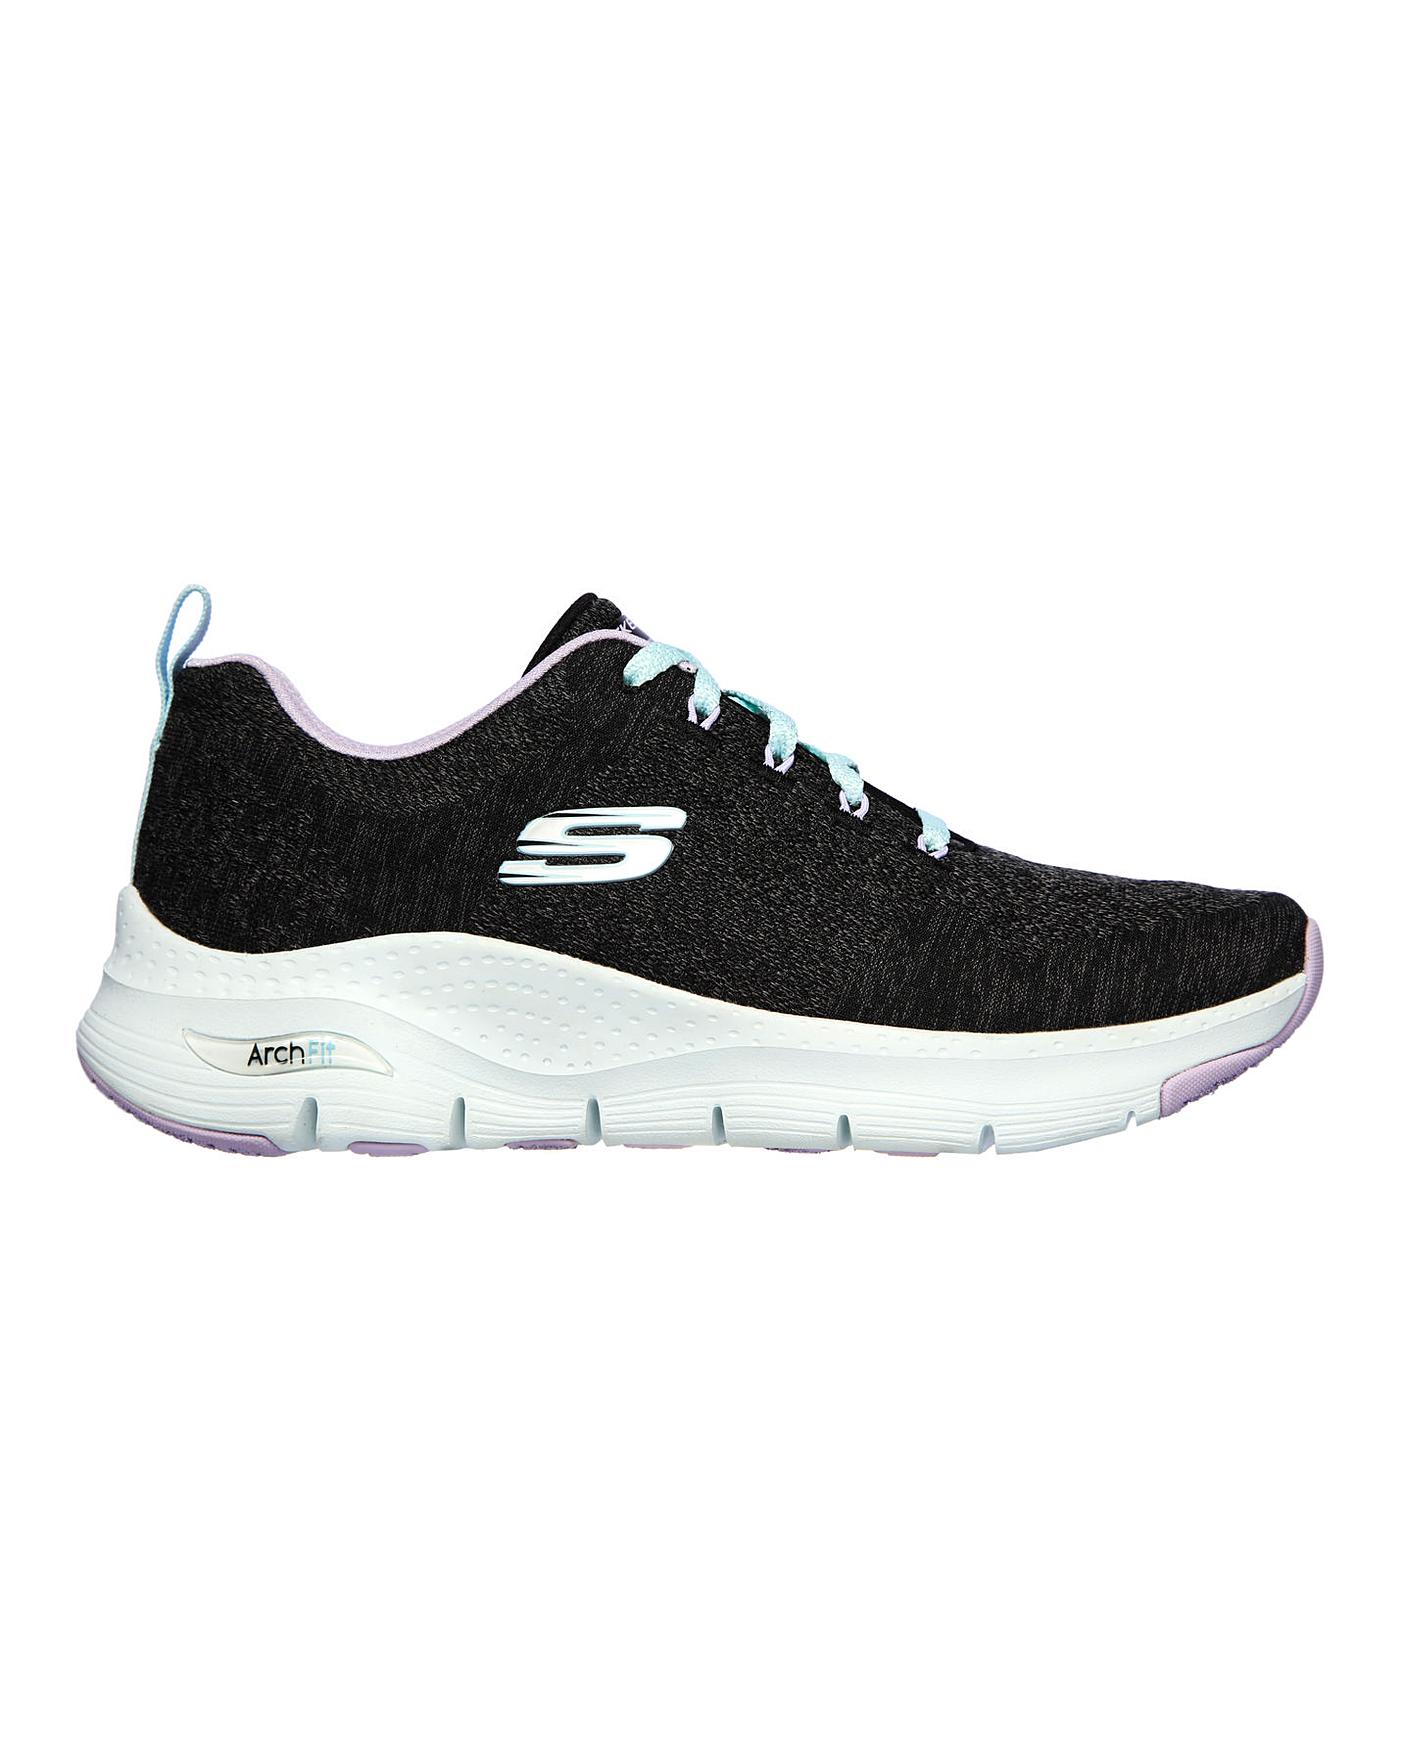 Skechers Arch Fit Comfy Wave Trainers 